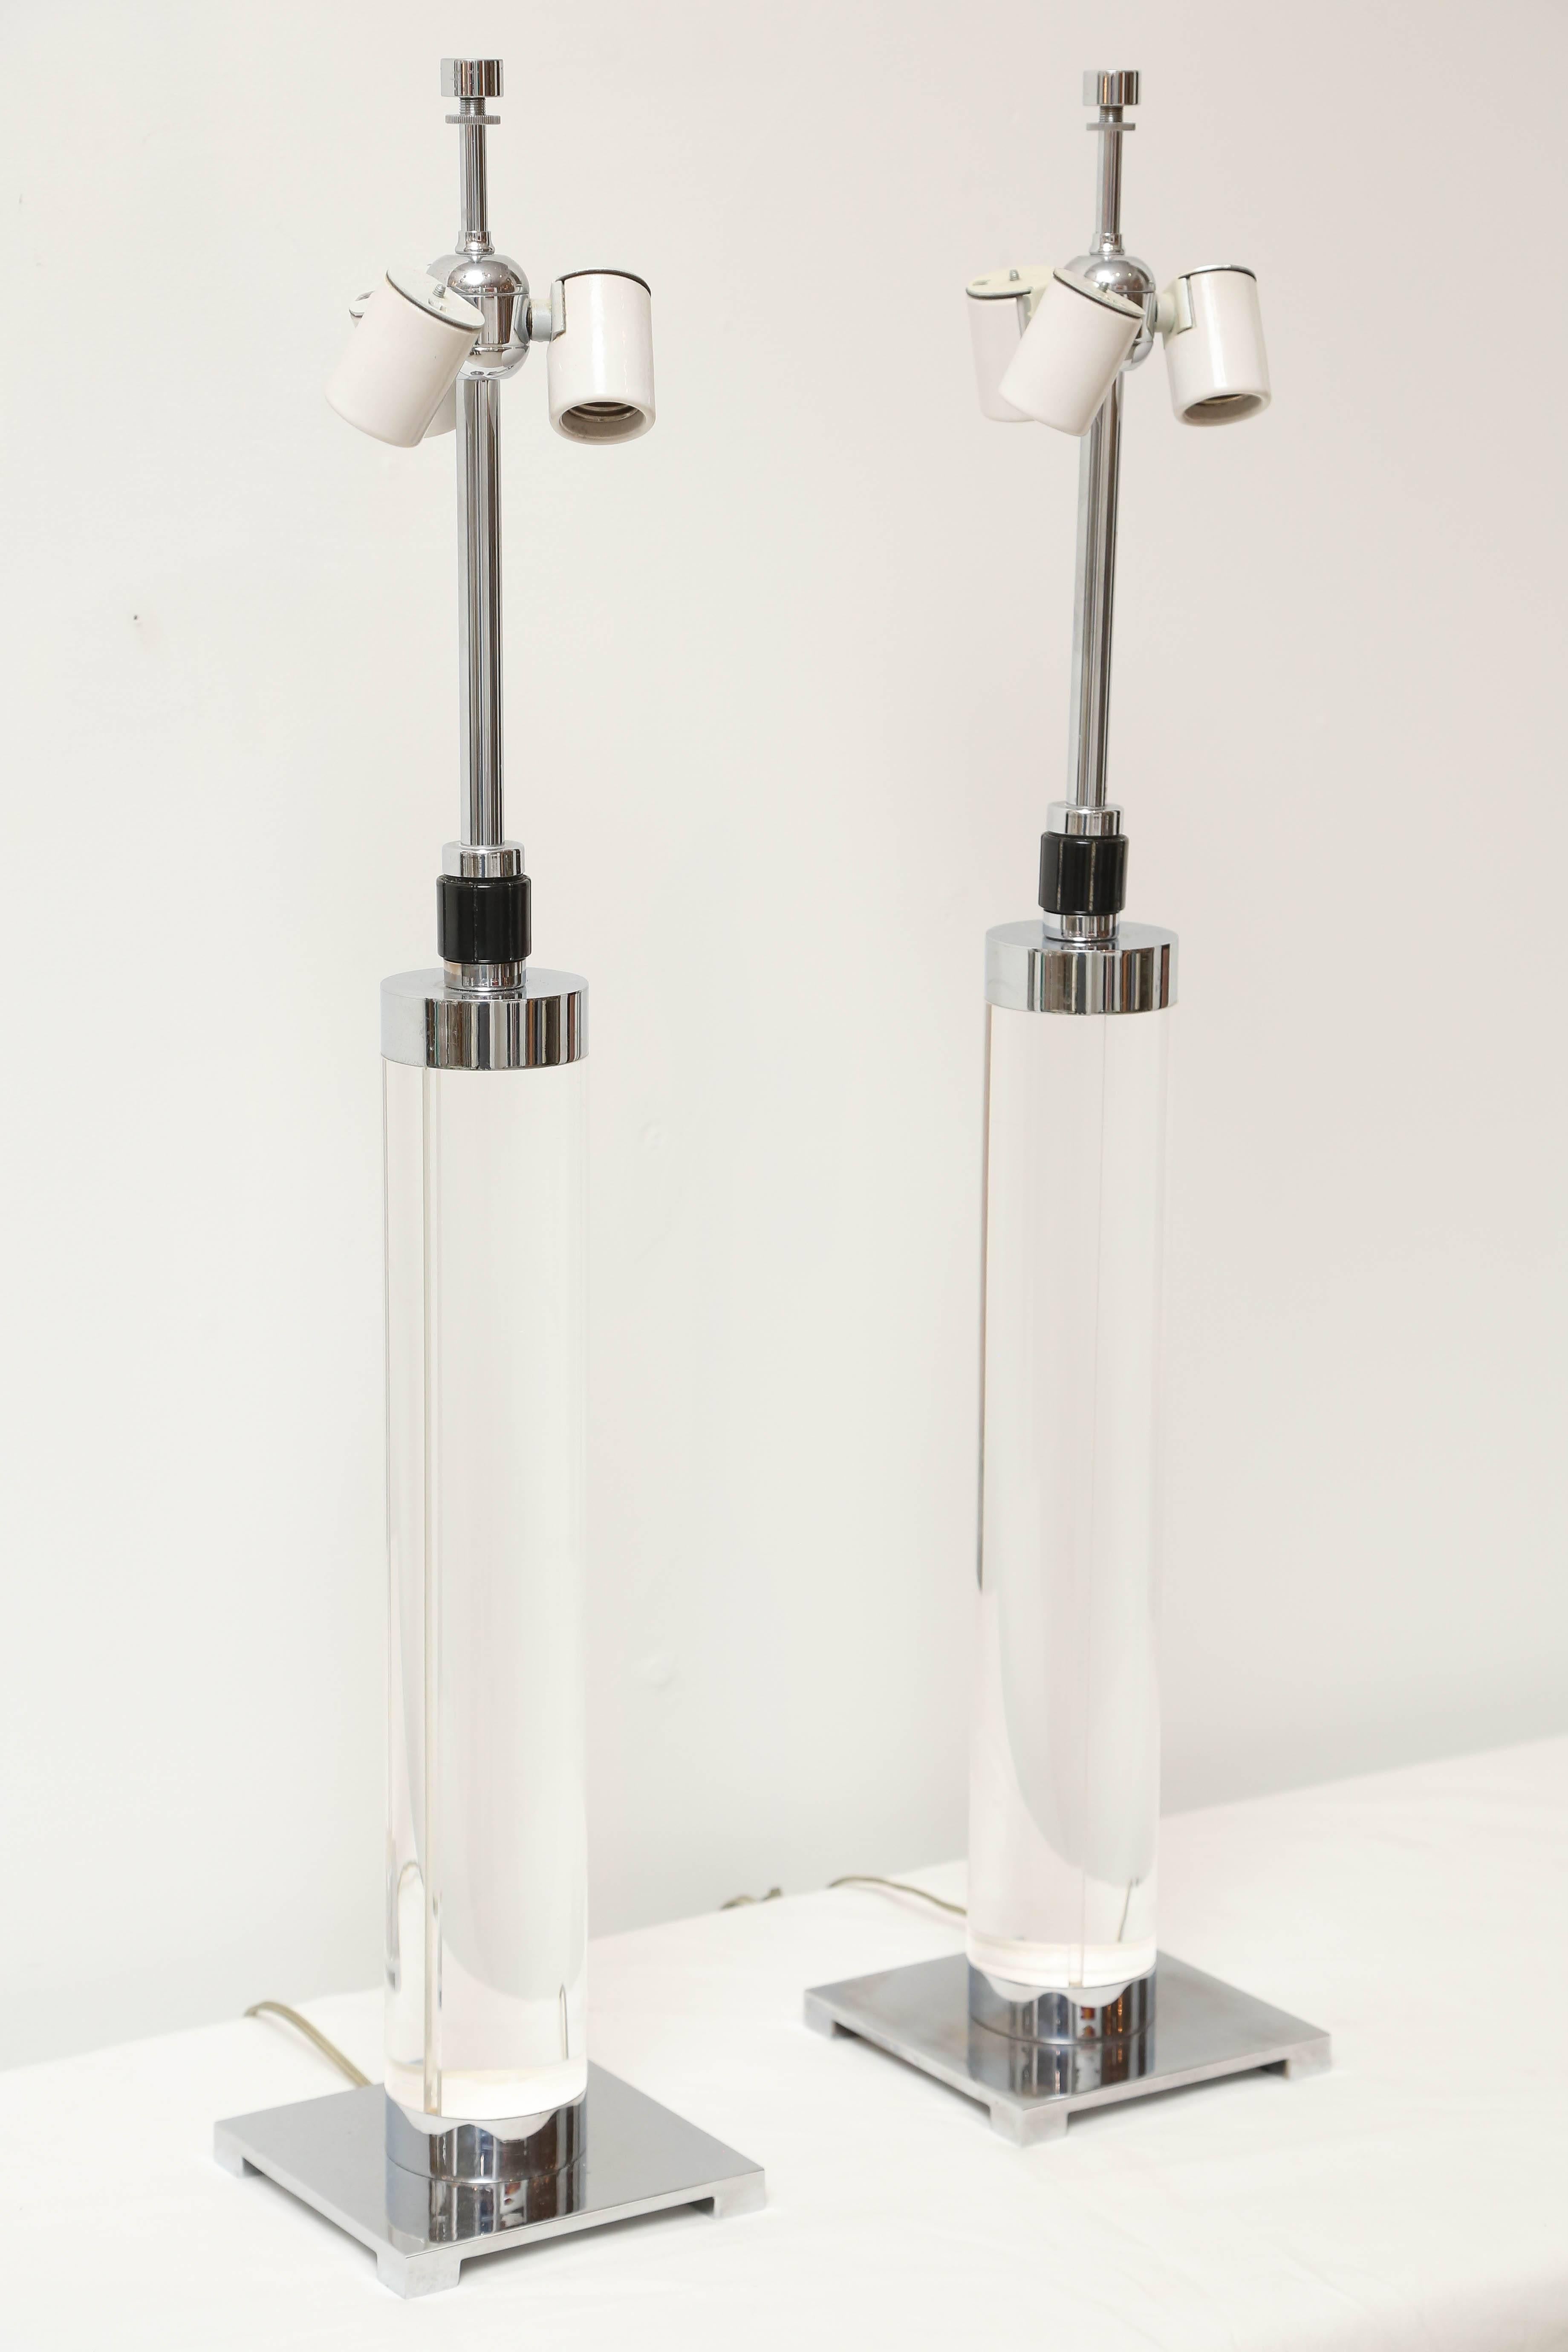 Pair of cylindrical Lucite and chrome table lamps with hidden cord in channel at back of lamp.
Original hardware.